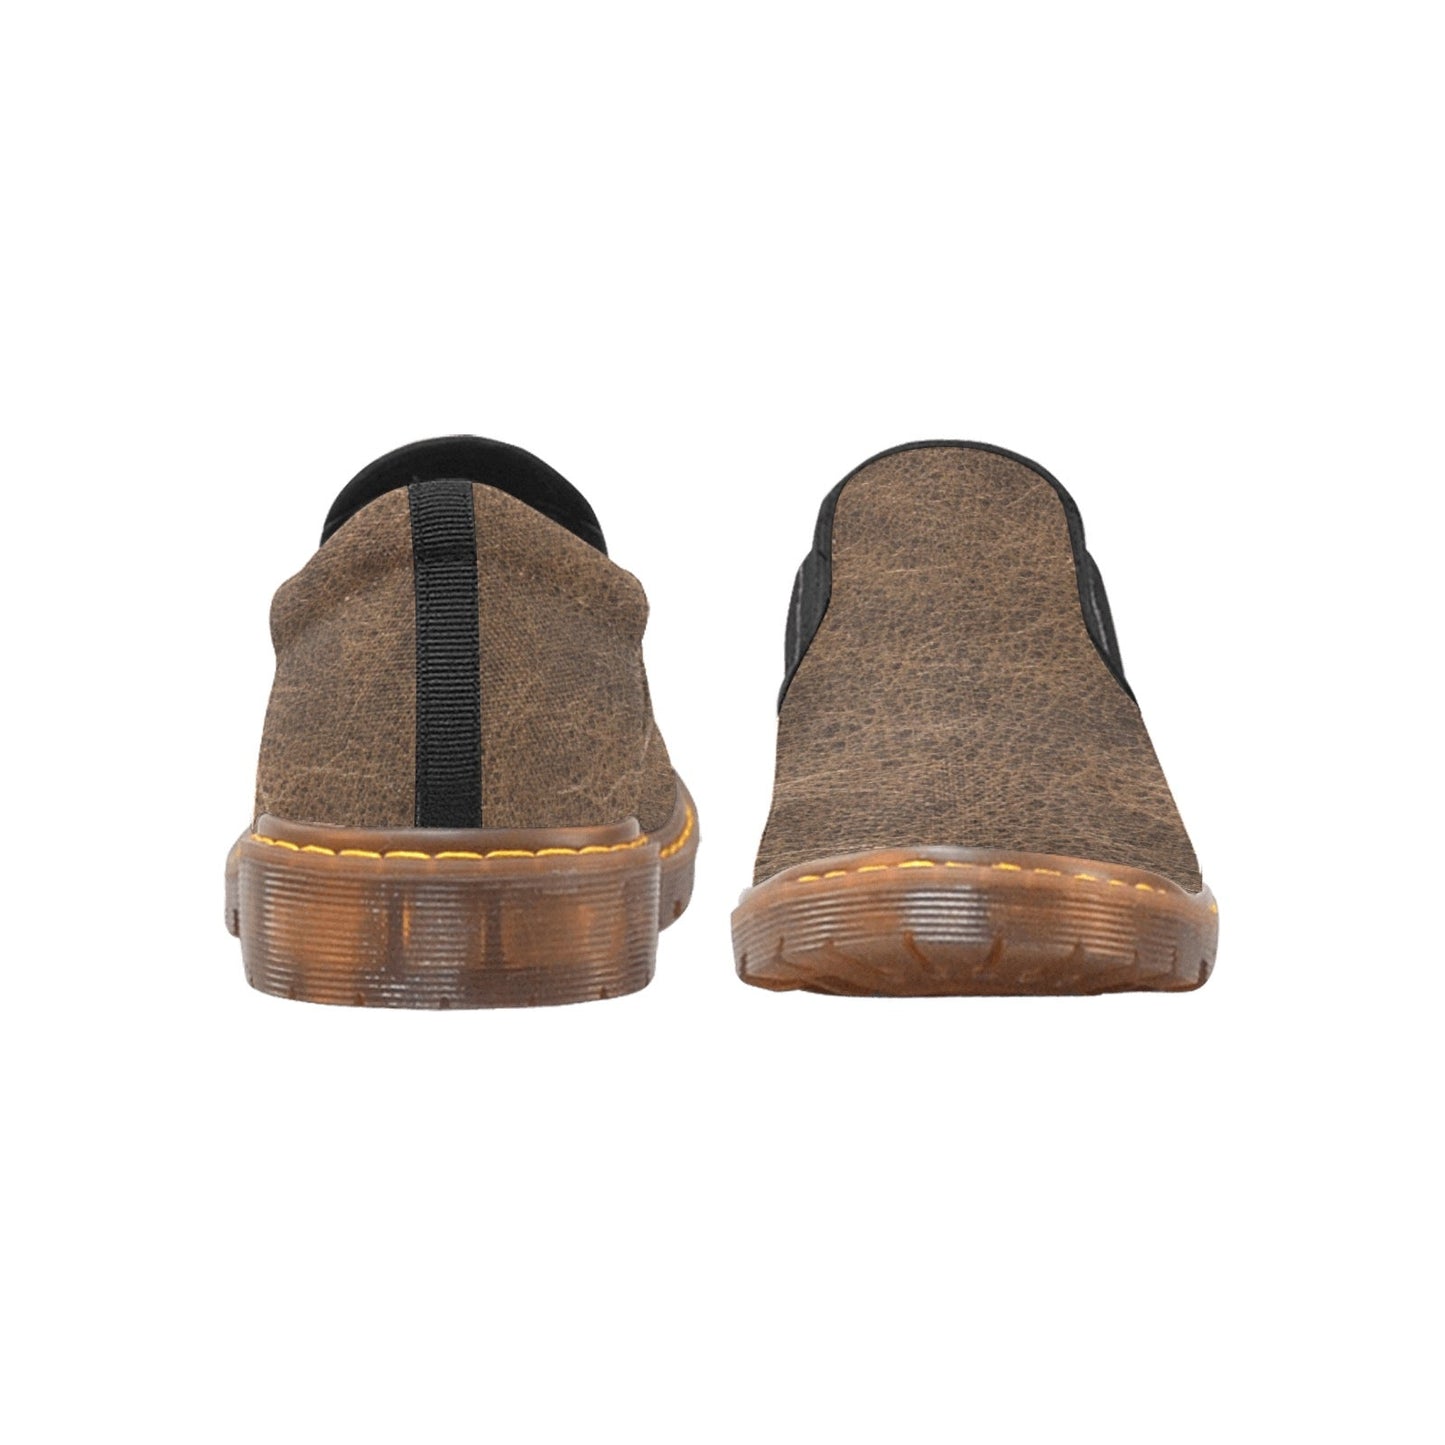 LEATHERTONE [BROWN] Men's Slip-On Loafer | CANAANWEAR | Shoes |